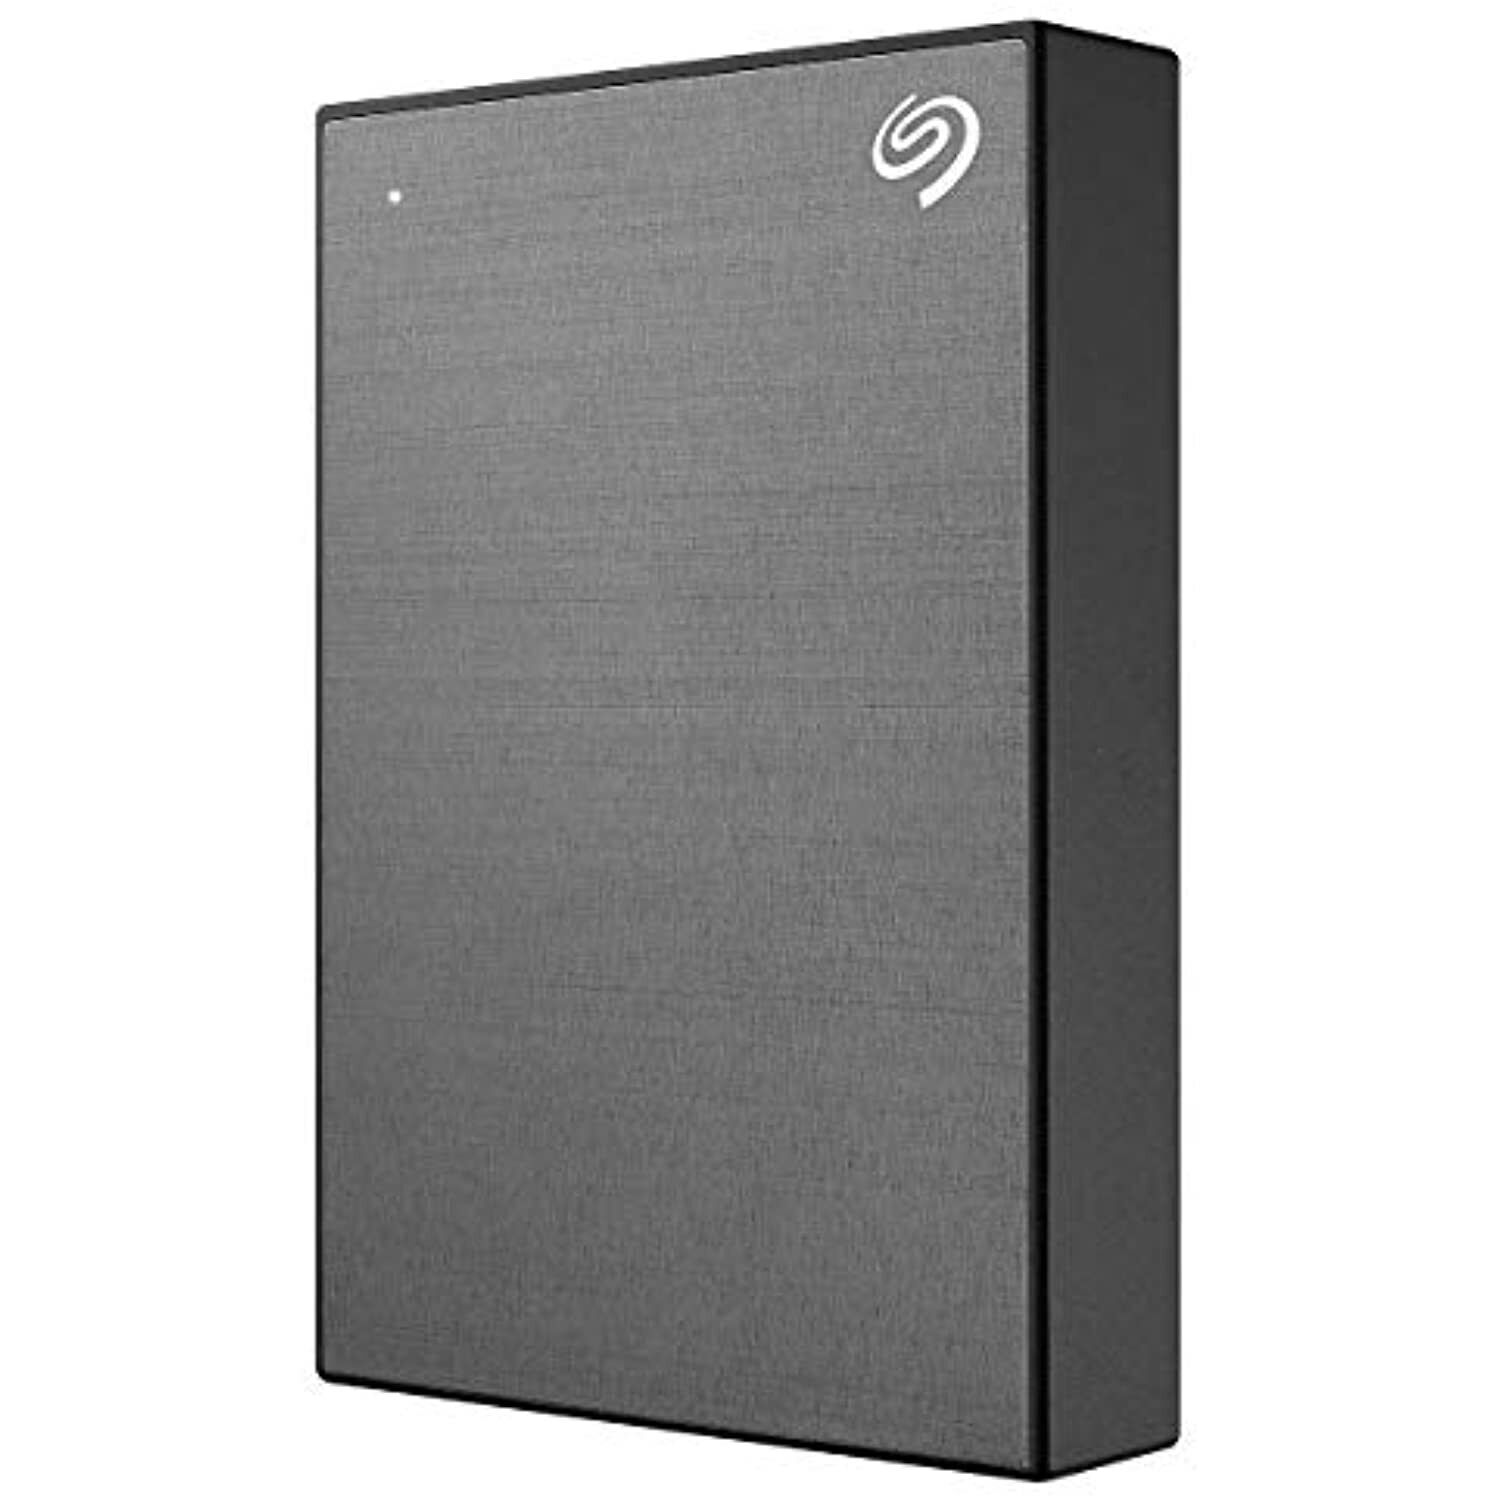 5TB Seagate Backup Plus with Data Recovery Service